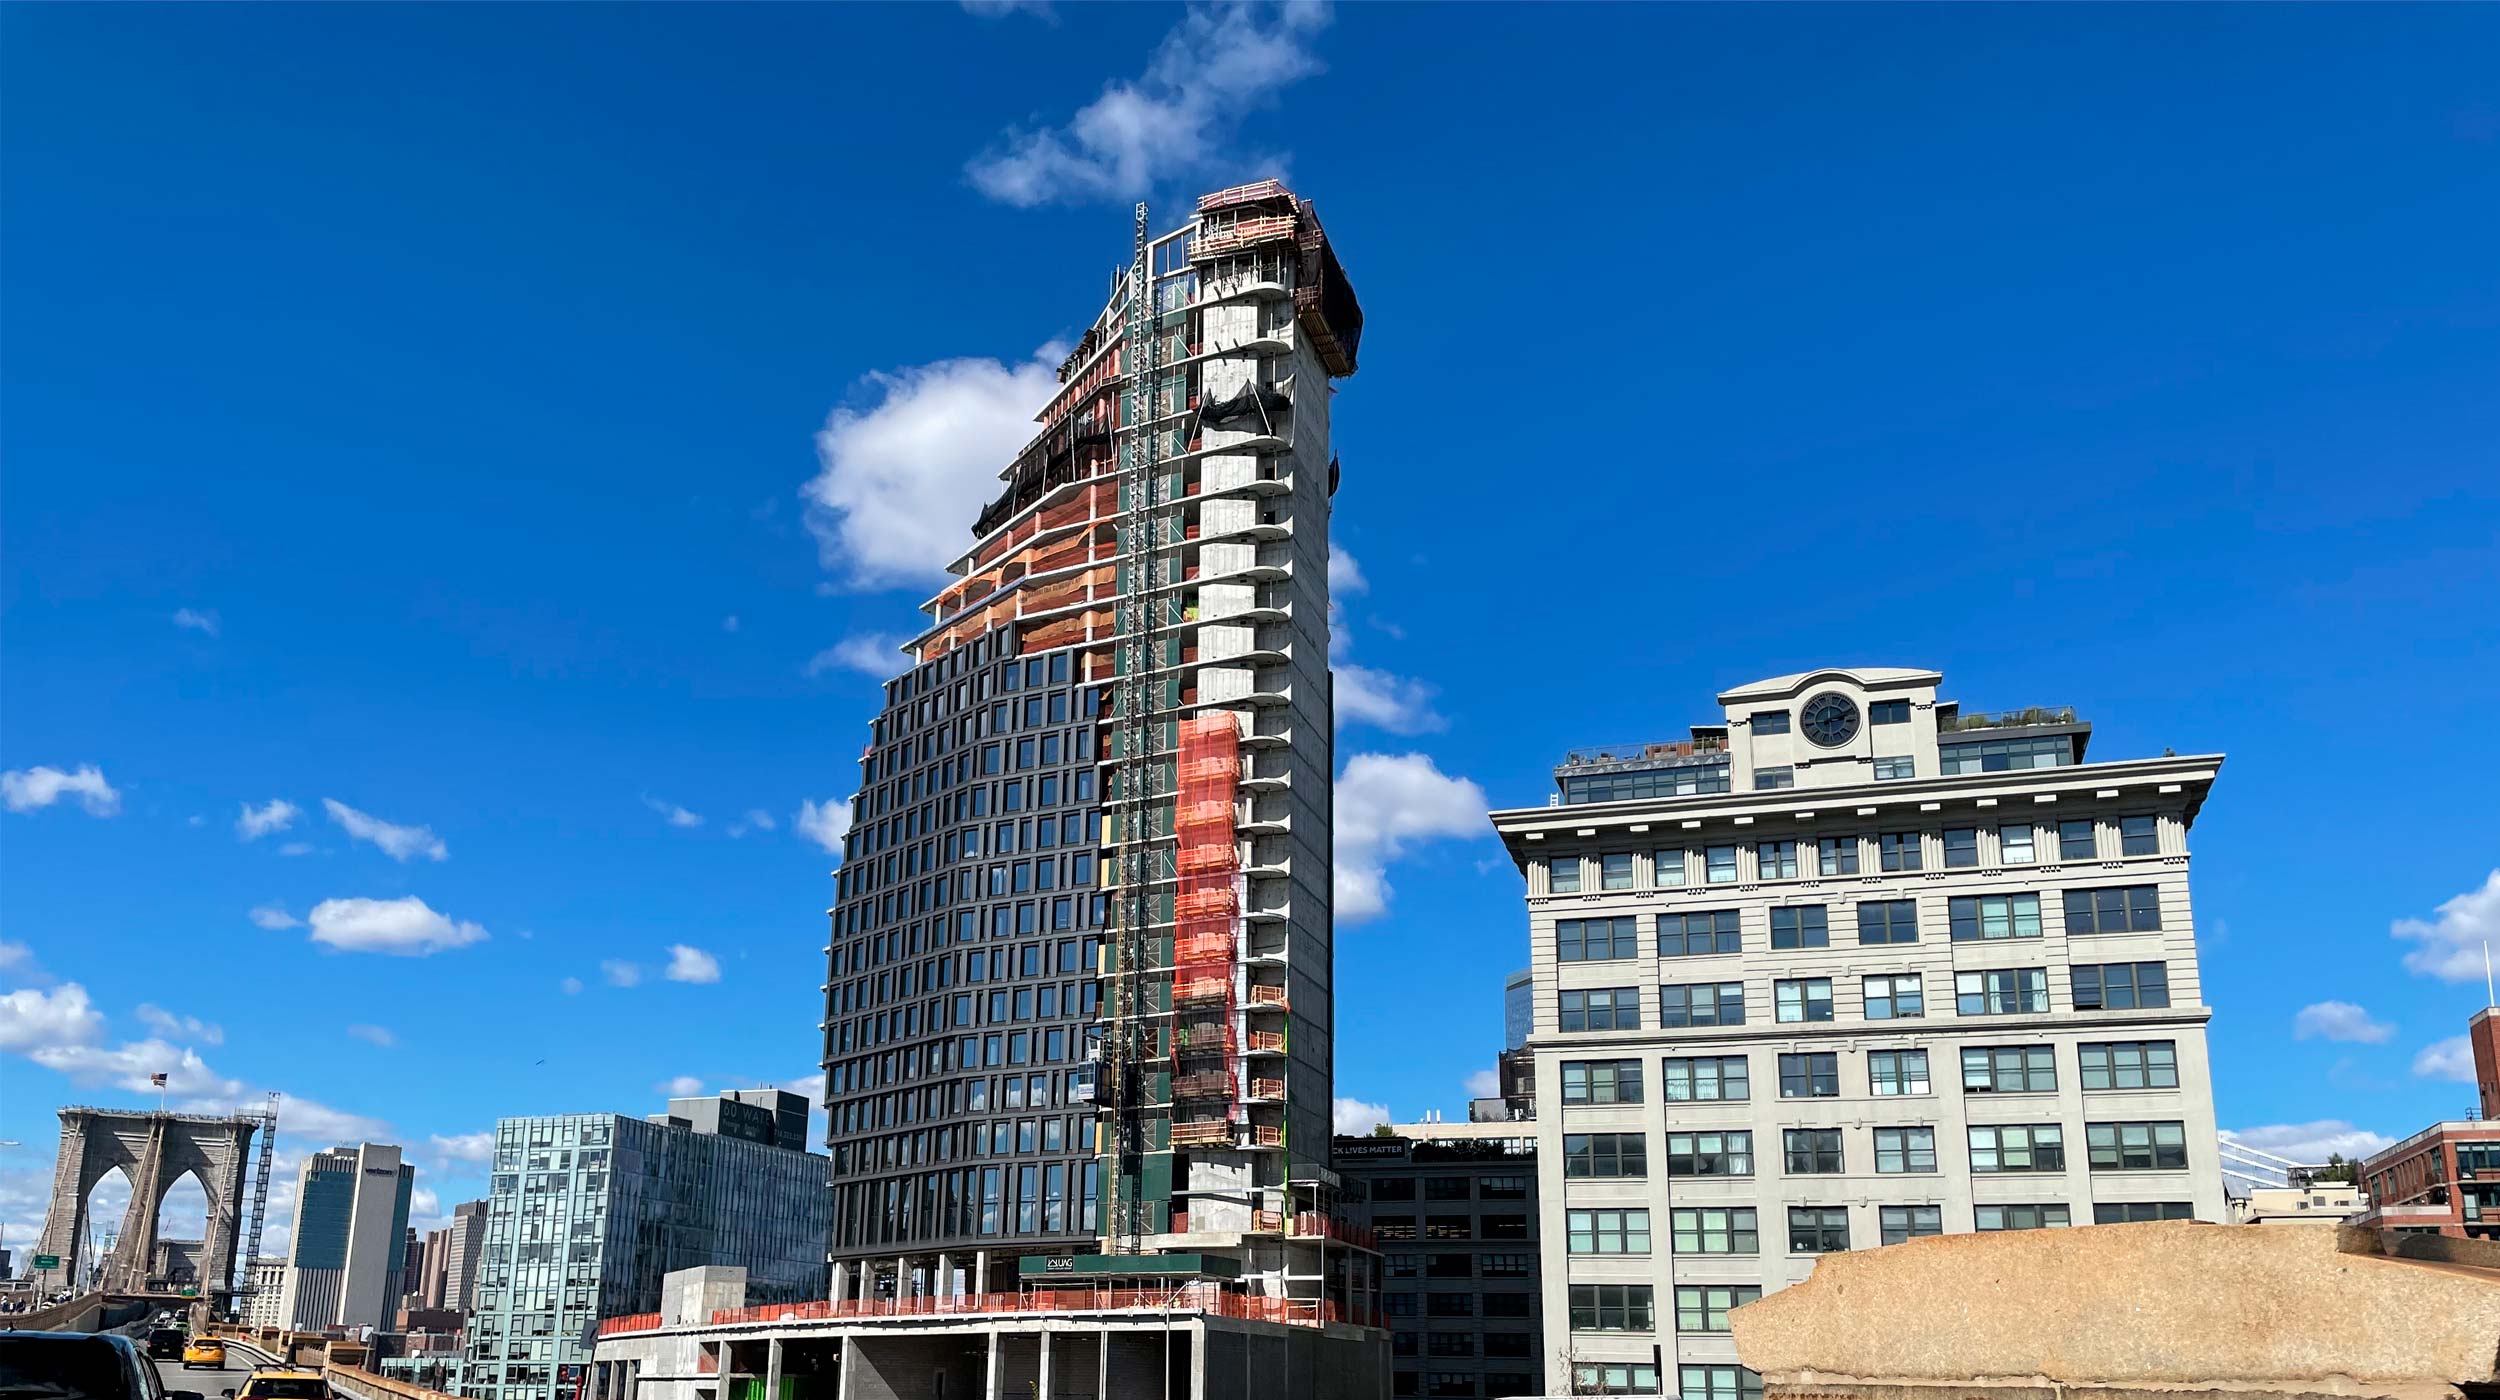 This curved structure is located in Dumbo, Brooklyn, one of New York City's trendiest neighborhoods. ULMA is providing formwork, shoring, and climbing solutions for the construction of this building.